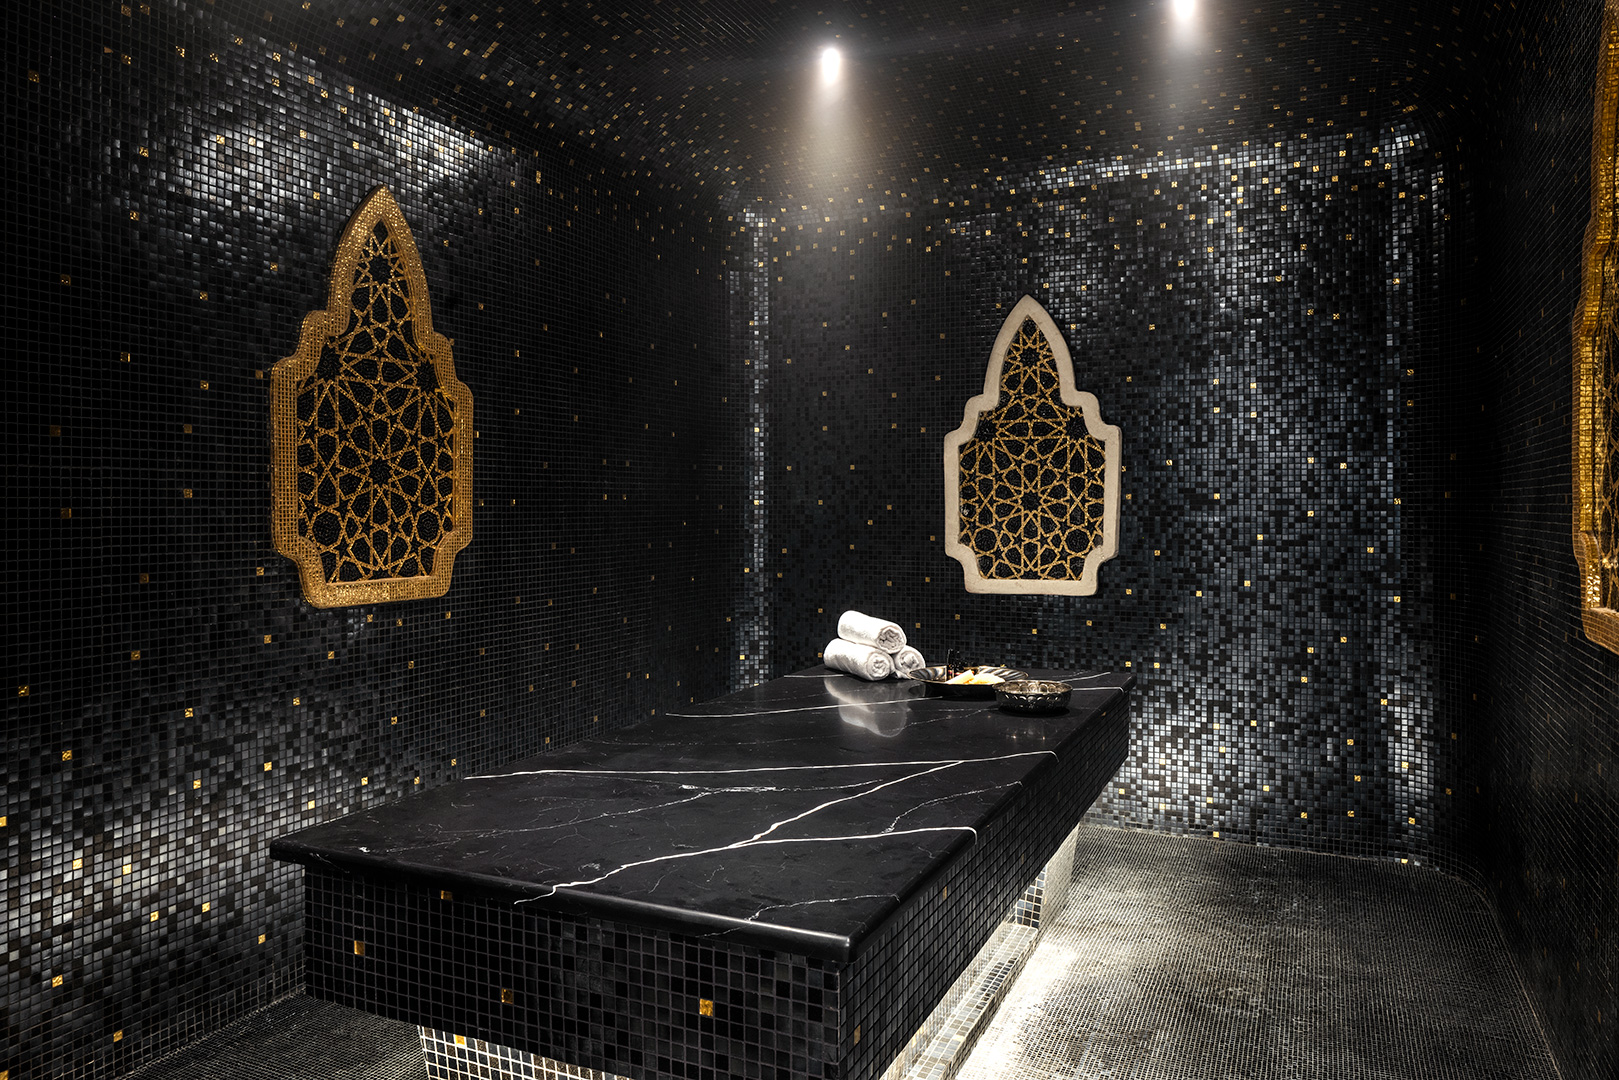 A luxurious private hammam room adorned with black mosaic tiles and gold accents. Two ornate, gold-framed wall features add a touch of elegance. The centerpiece is a large, black marble slab for reclining, with white towels and spa essentials neatly arranged to one side, all illuminated by soft ceiling lights.